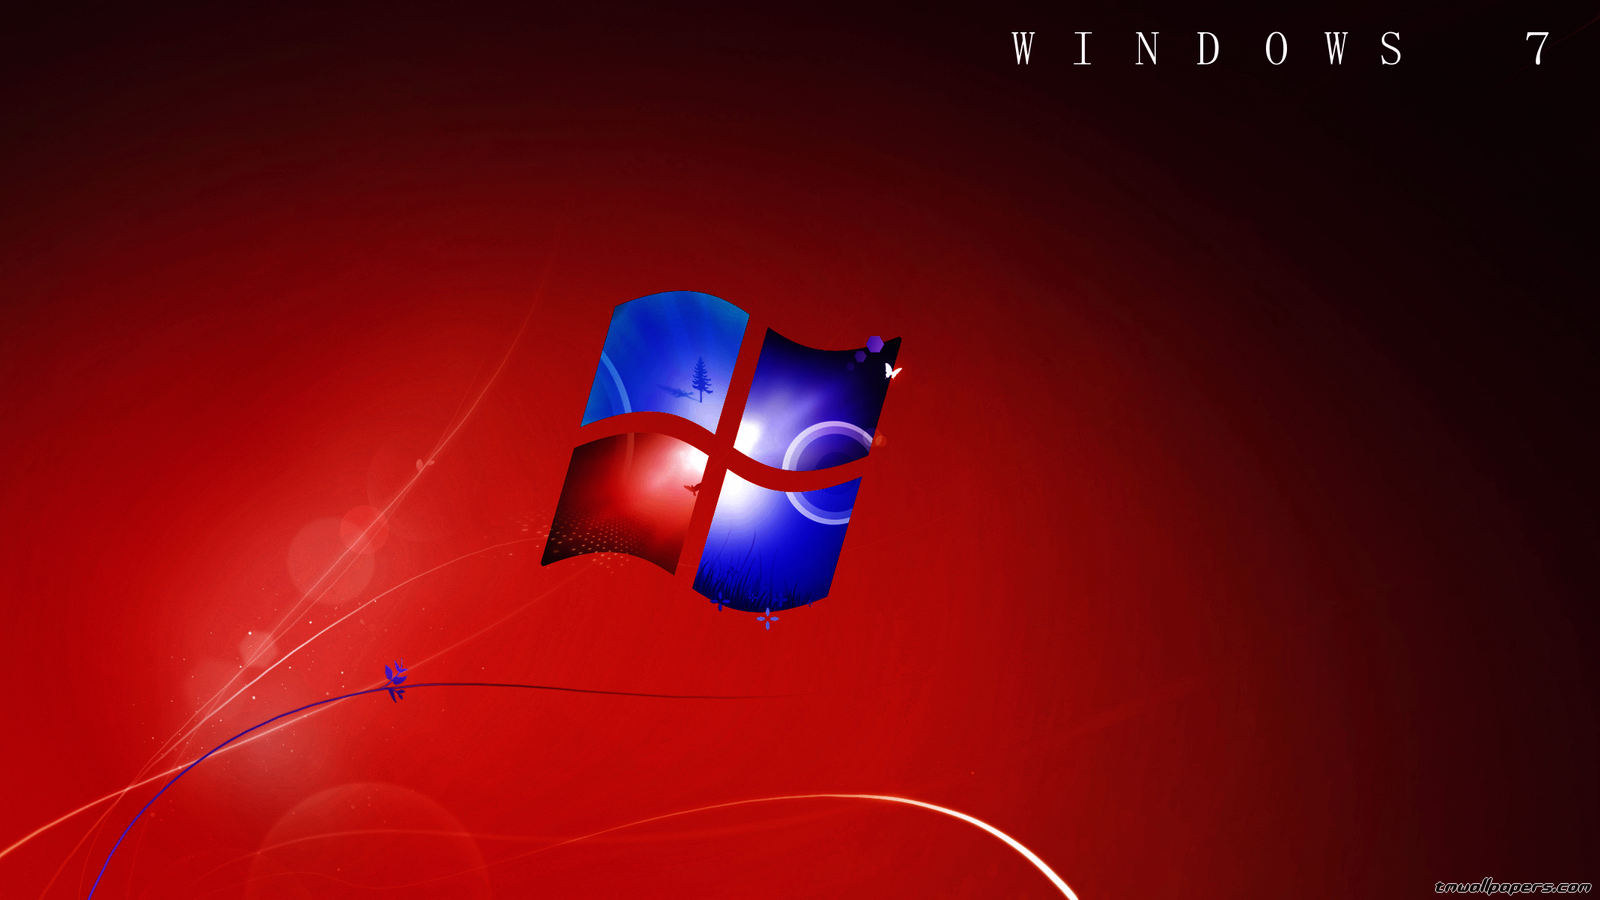 TM.Wallpapers Wide wallpapers e HD wallpapers - Windows 7